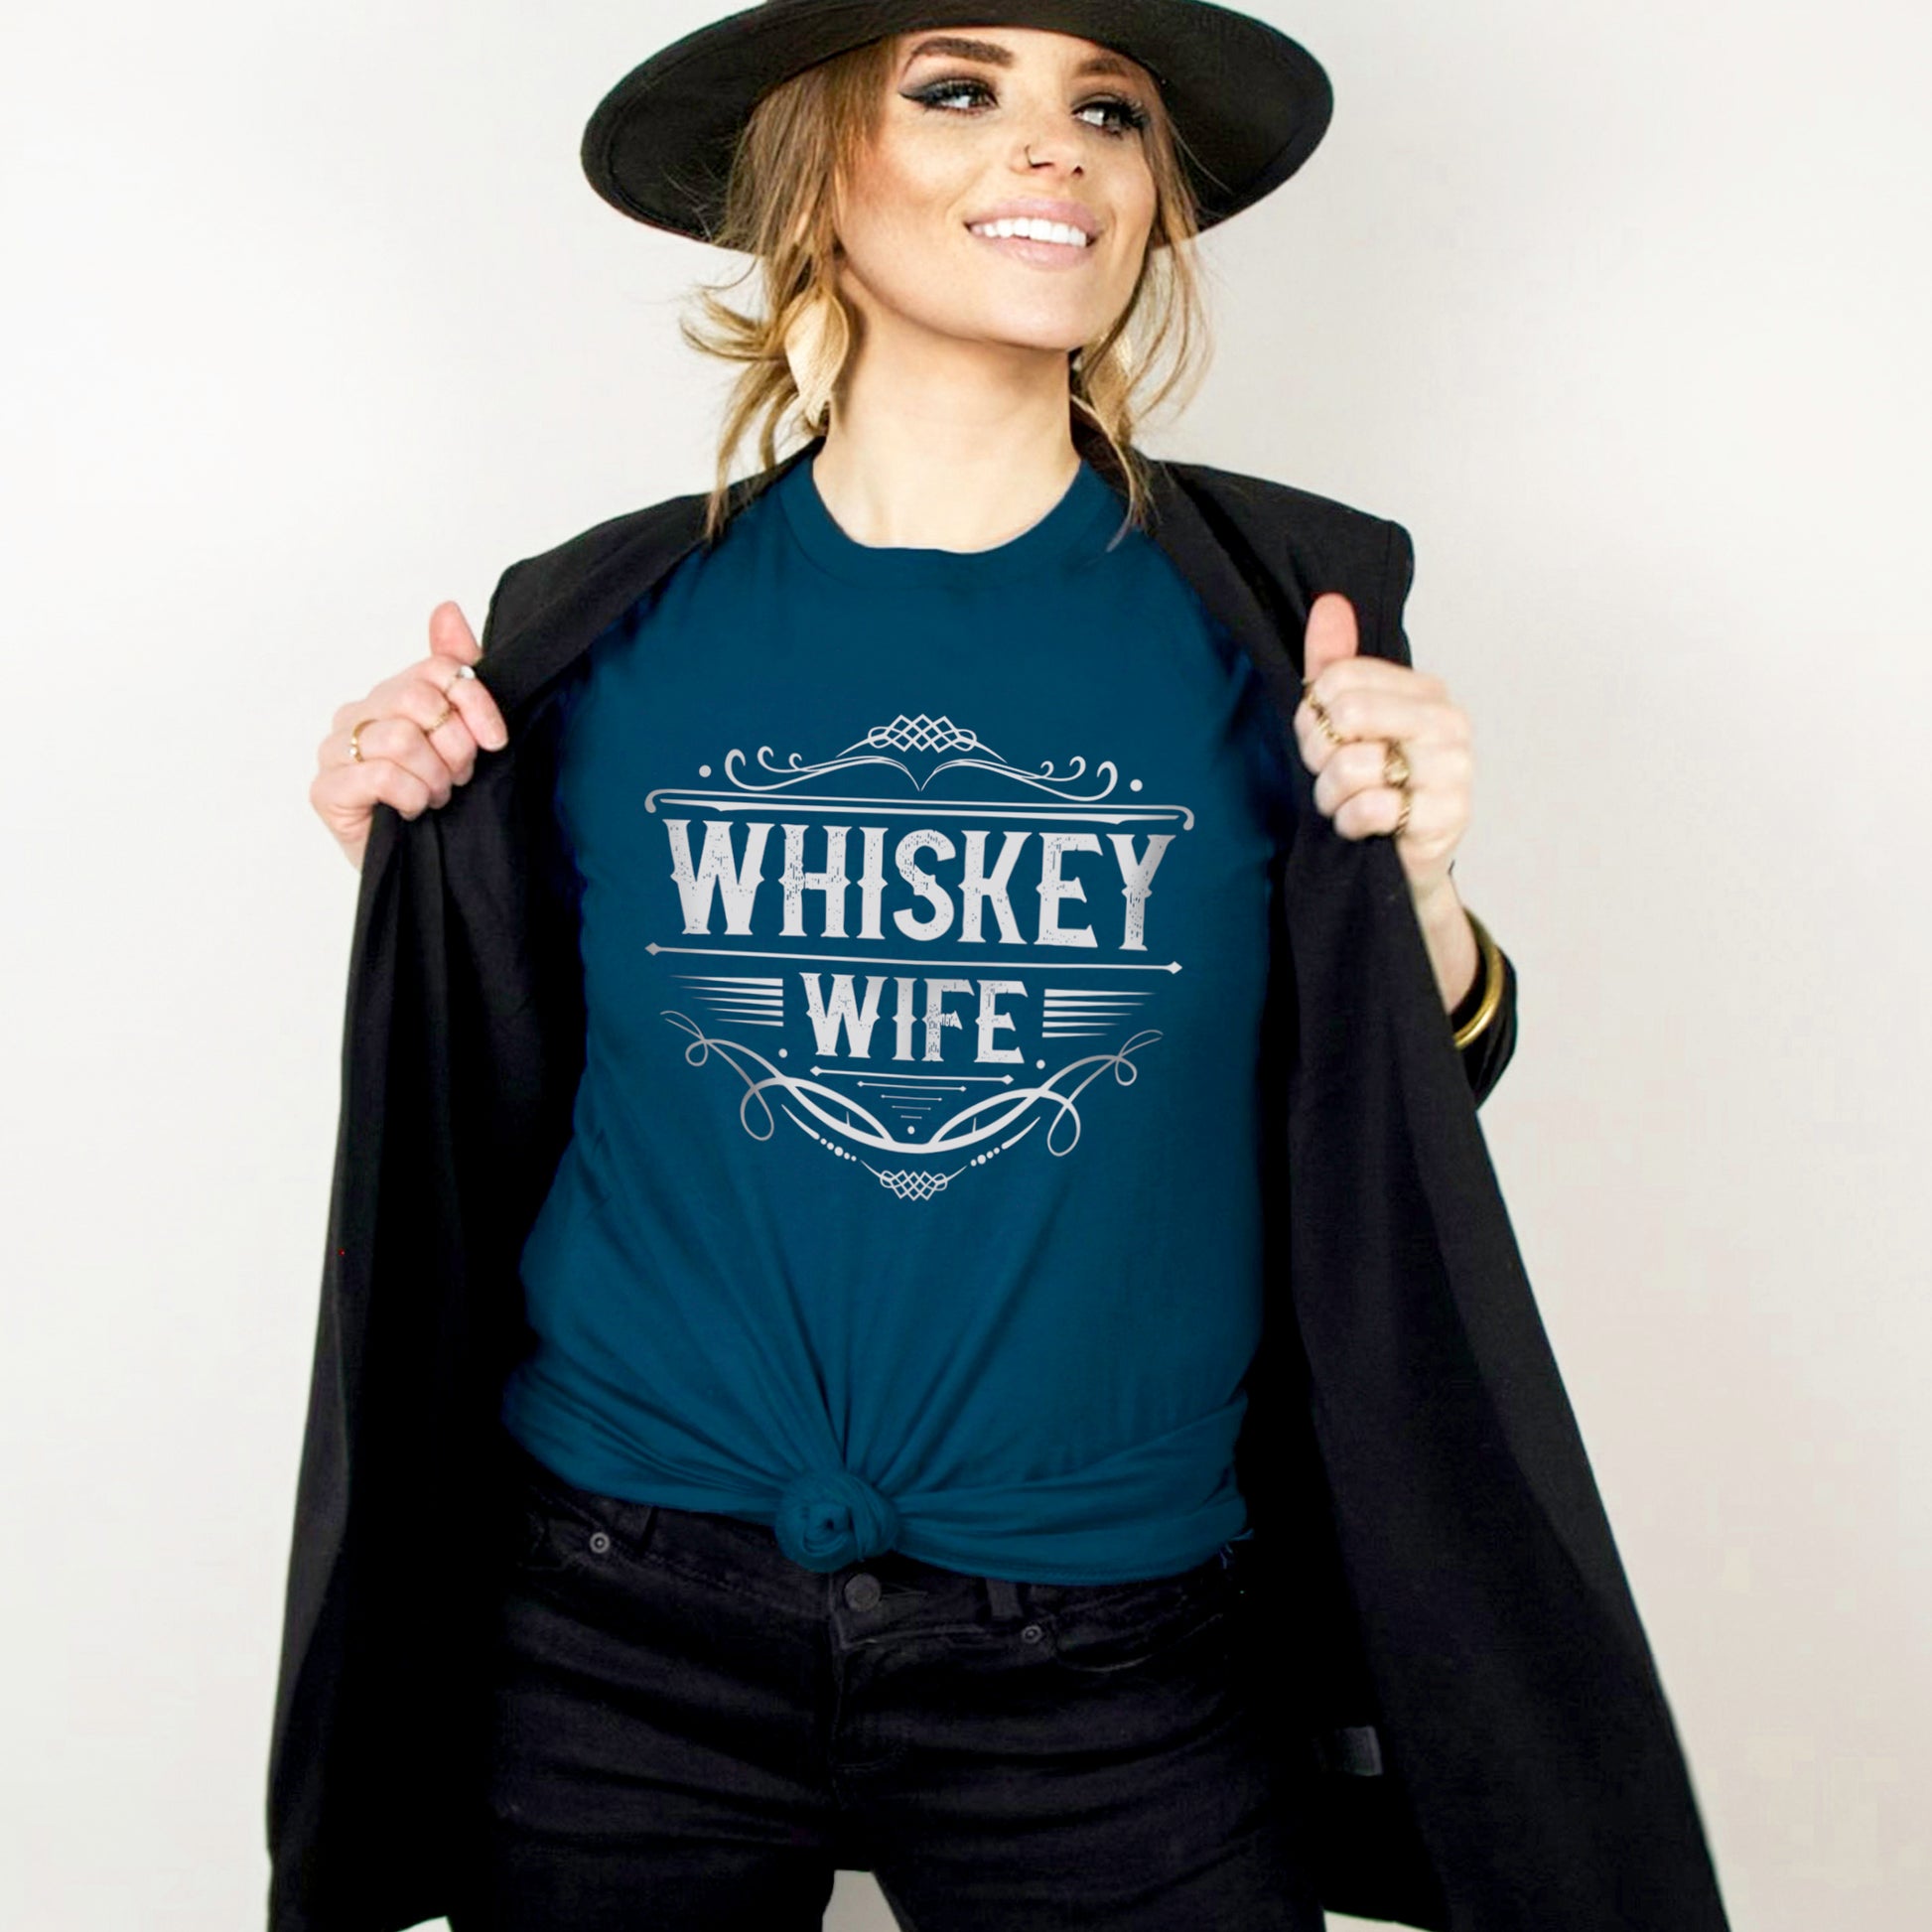 Woman wearing a dark teal whiskey wife shirt with a black blazer and felt hat